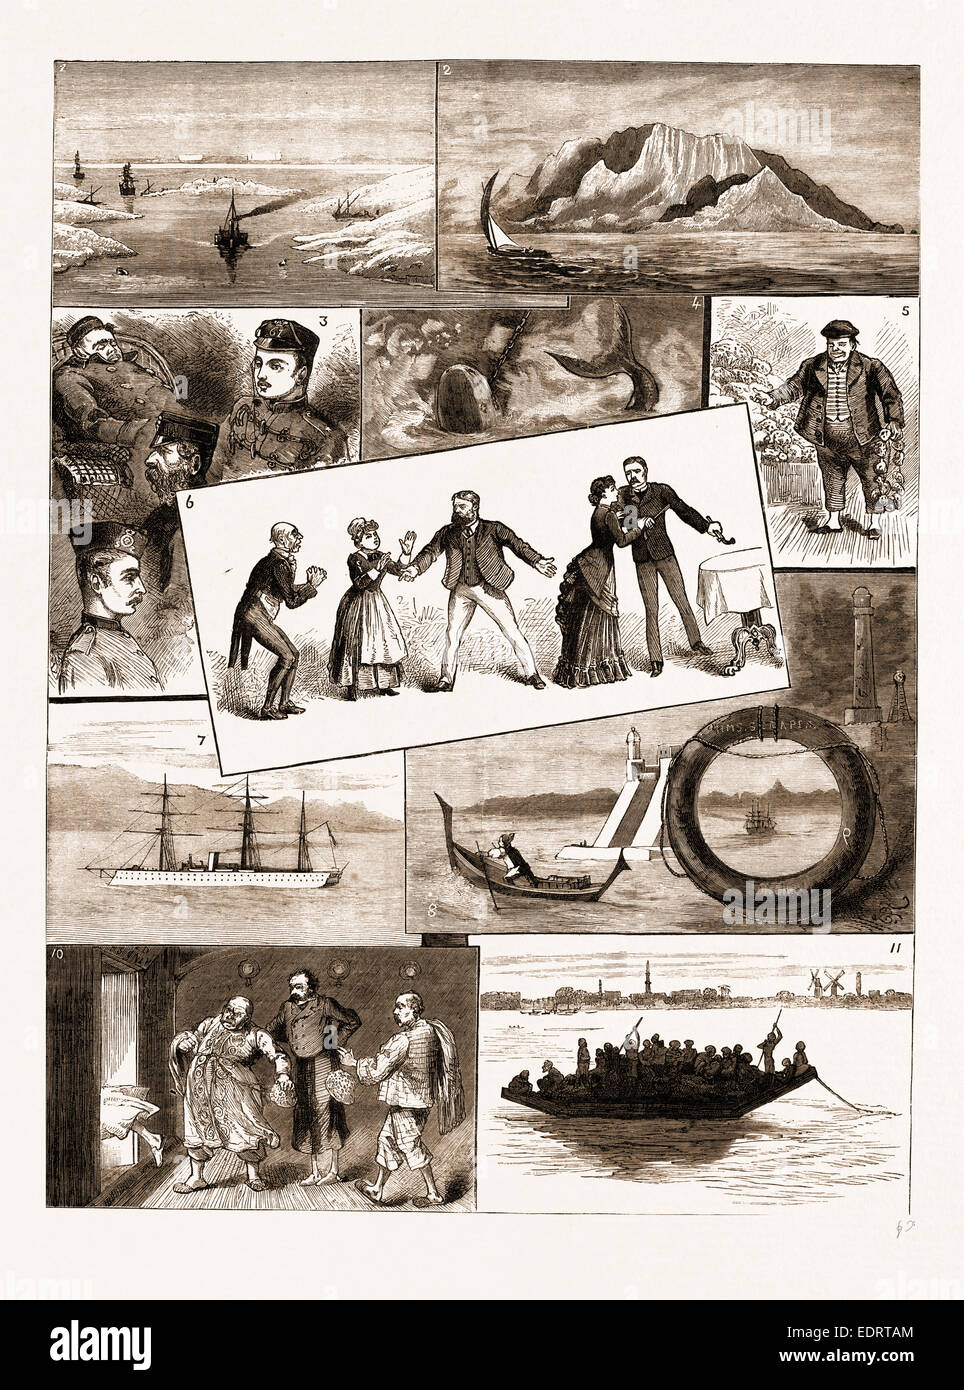 LIFE ON BOARD AN INDIAN TROOPSHIP, 1883: 1. Lake Timsah, Suez Canal. 2. Aden. 3. Some of the Passengers. 4. 'Hooked,' Stock Photo